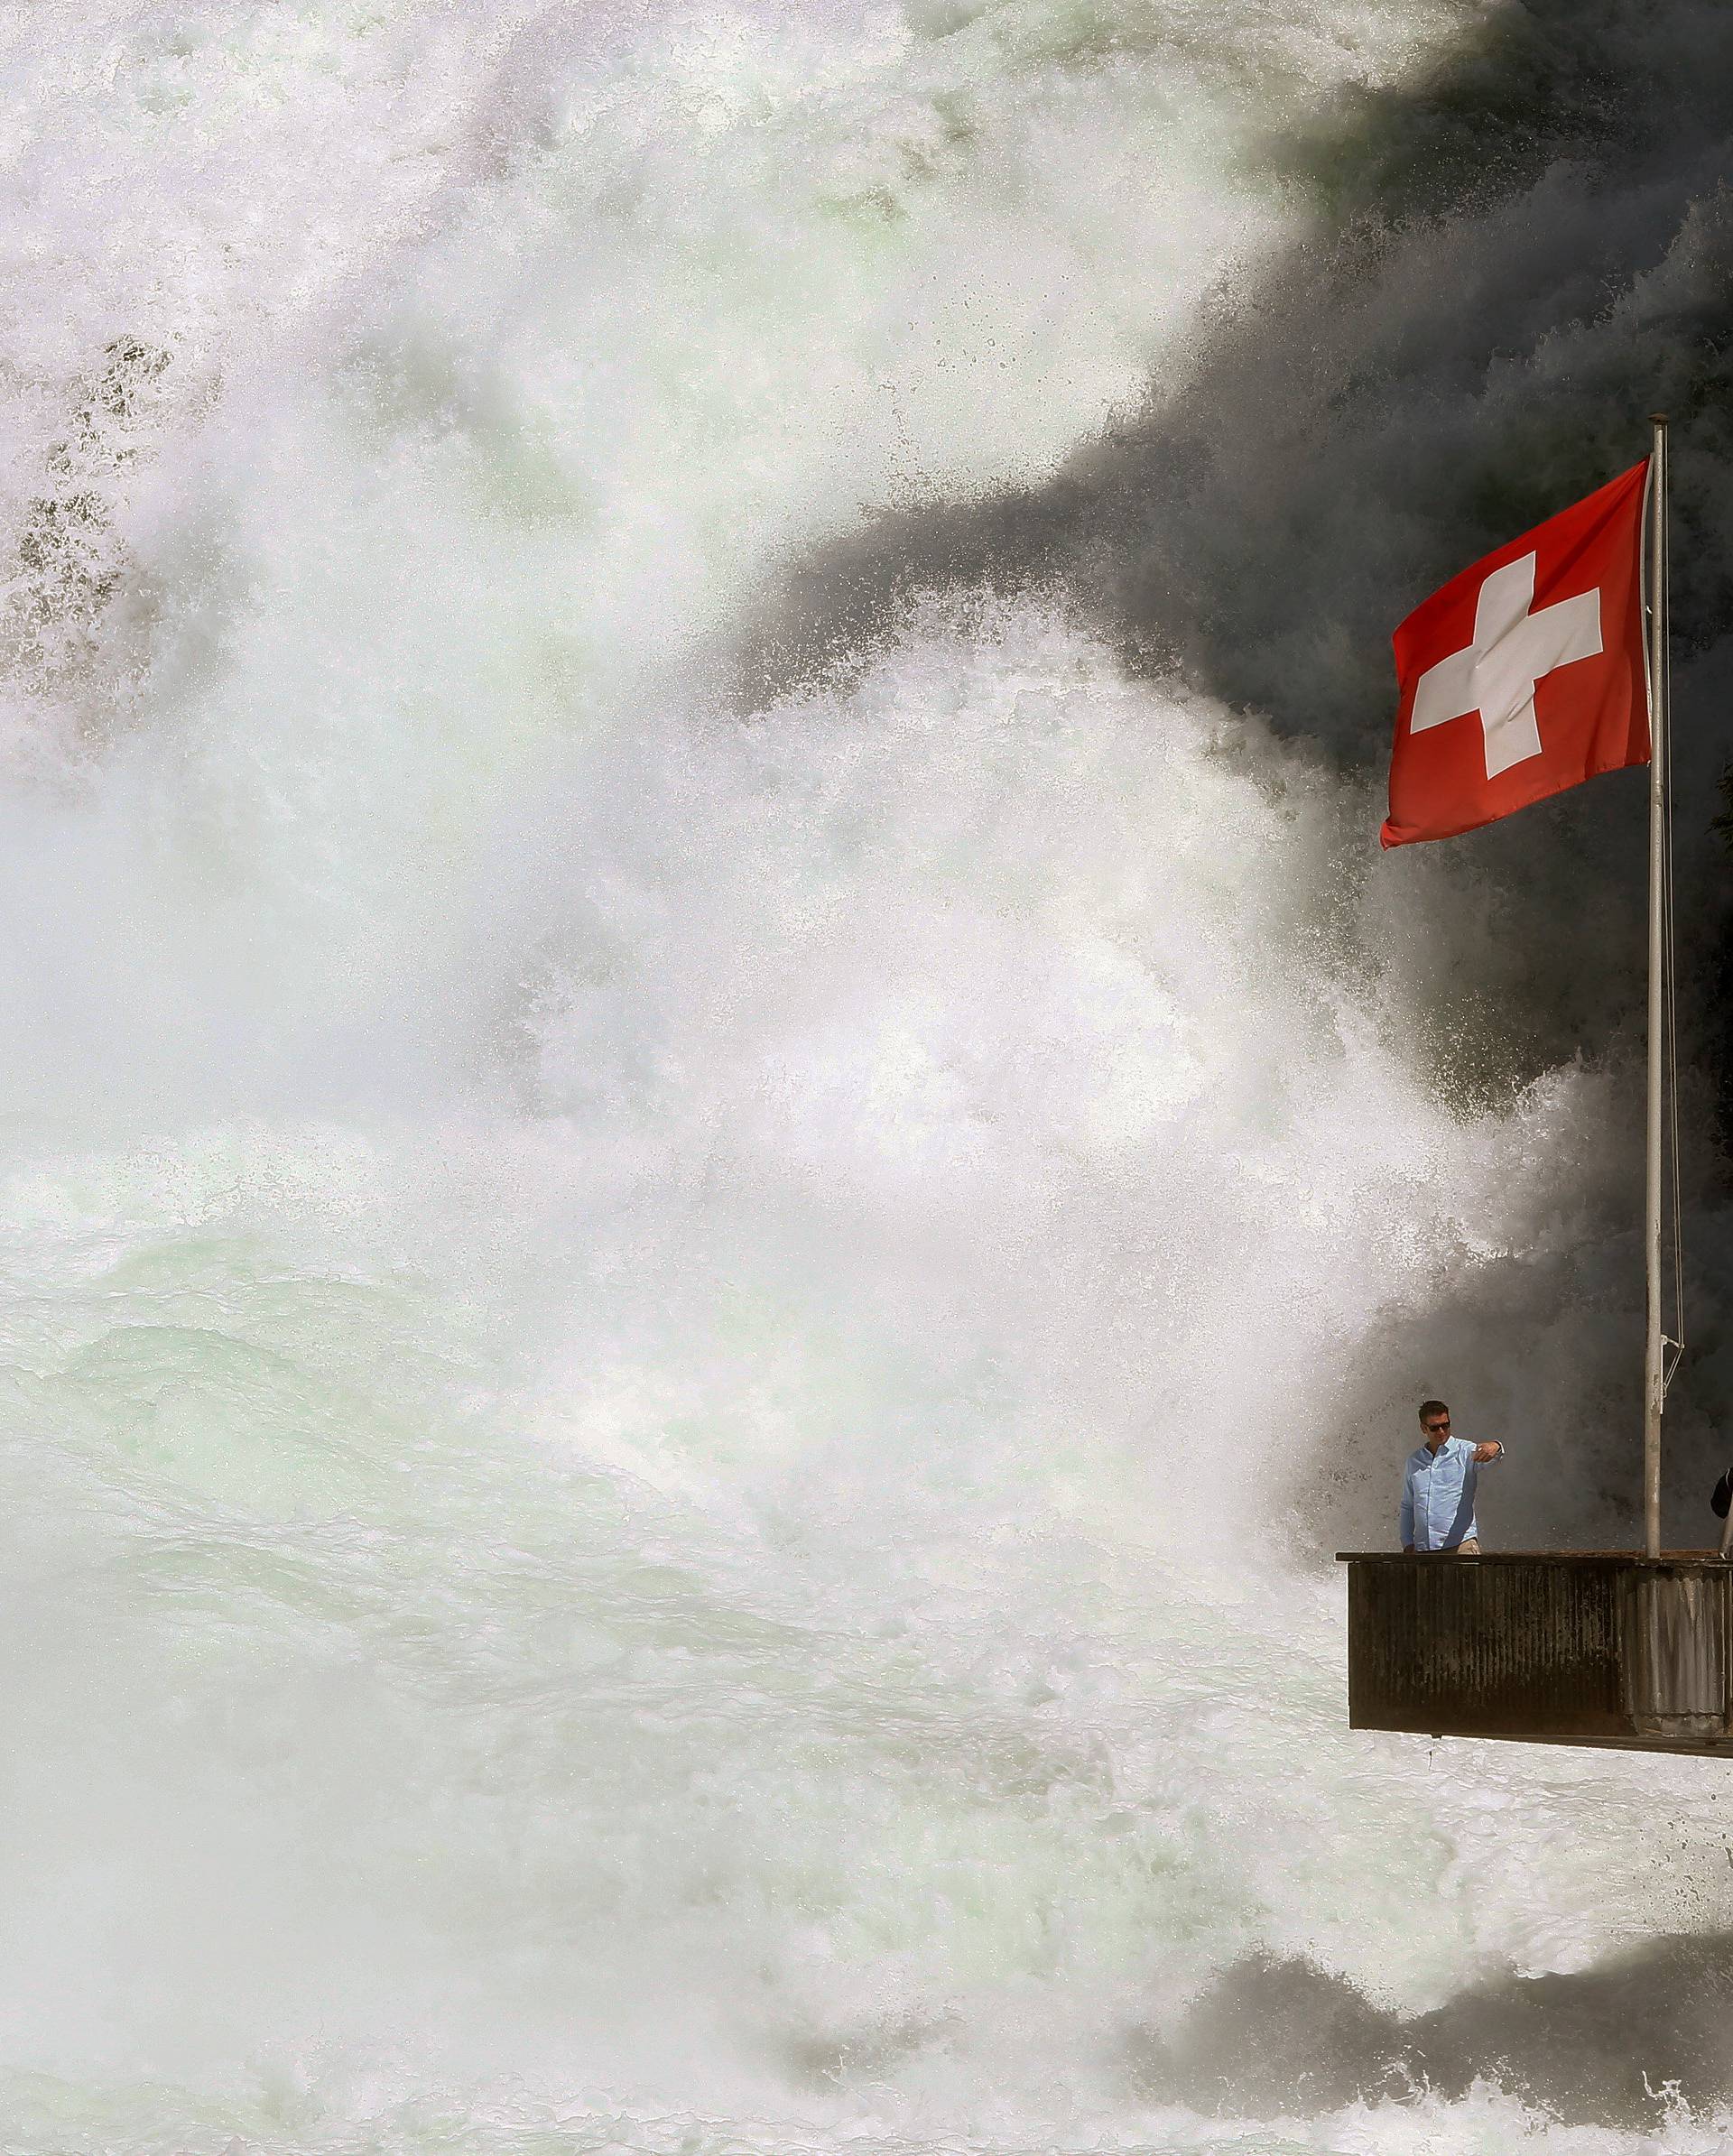 Switzerland's national flag fies as a man takes a selfie on a visitor platform beside the Rhine Falls in Neuhausen